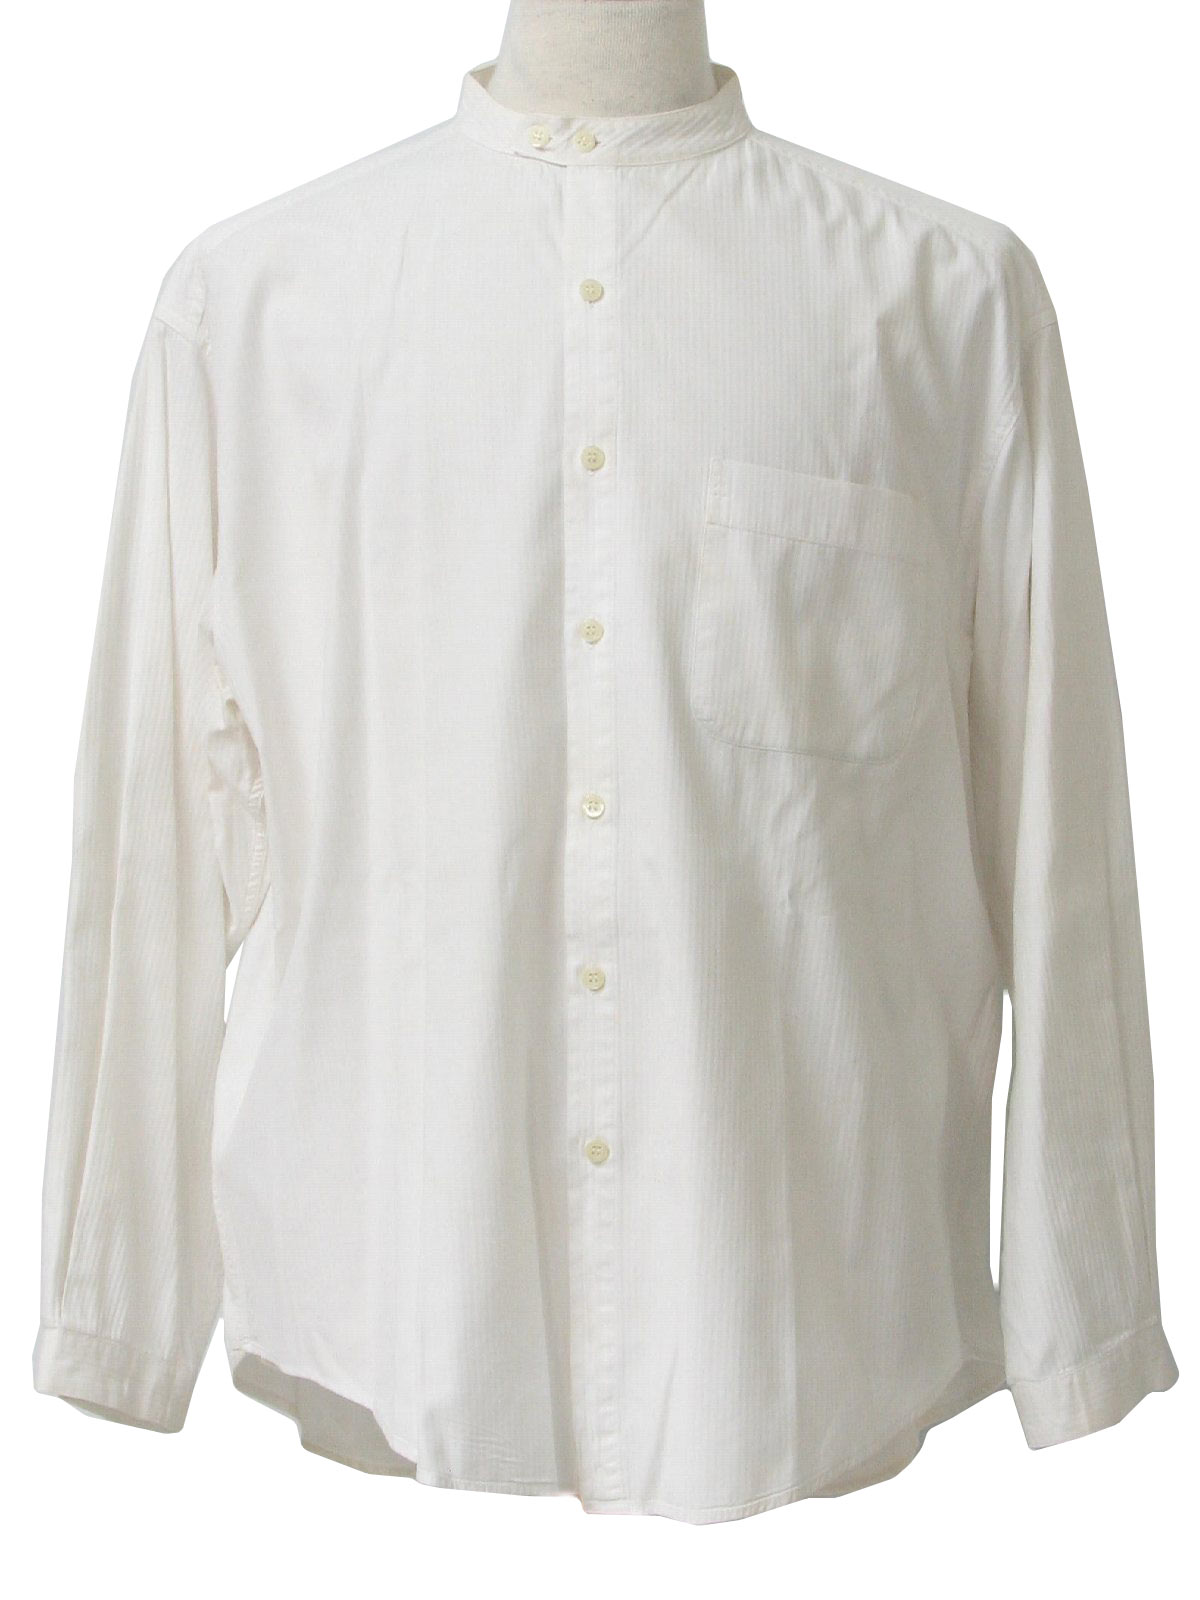 1920s Gap Shirt: 20s style (made in 80s) -Gap- Mens white cotton with ...